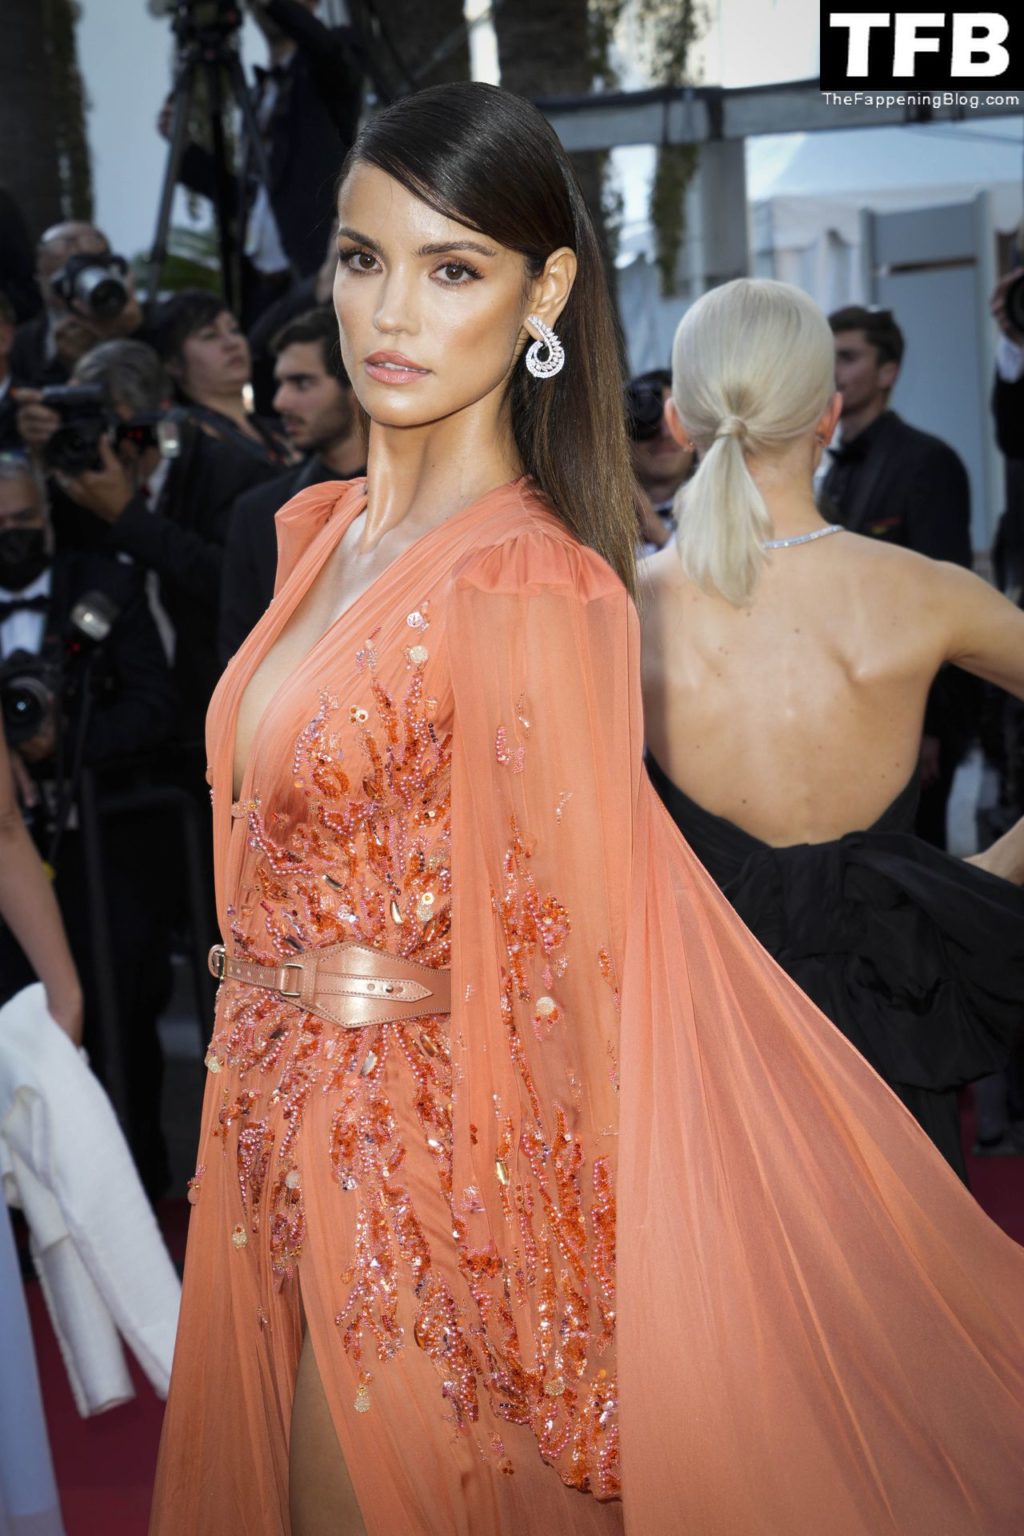 Sofia Resing Displays Her Sexy Tits &amp; Legs at the 75th Annual Cannes Film Festival (51 Photos)